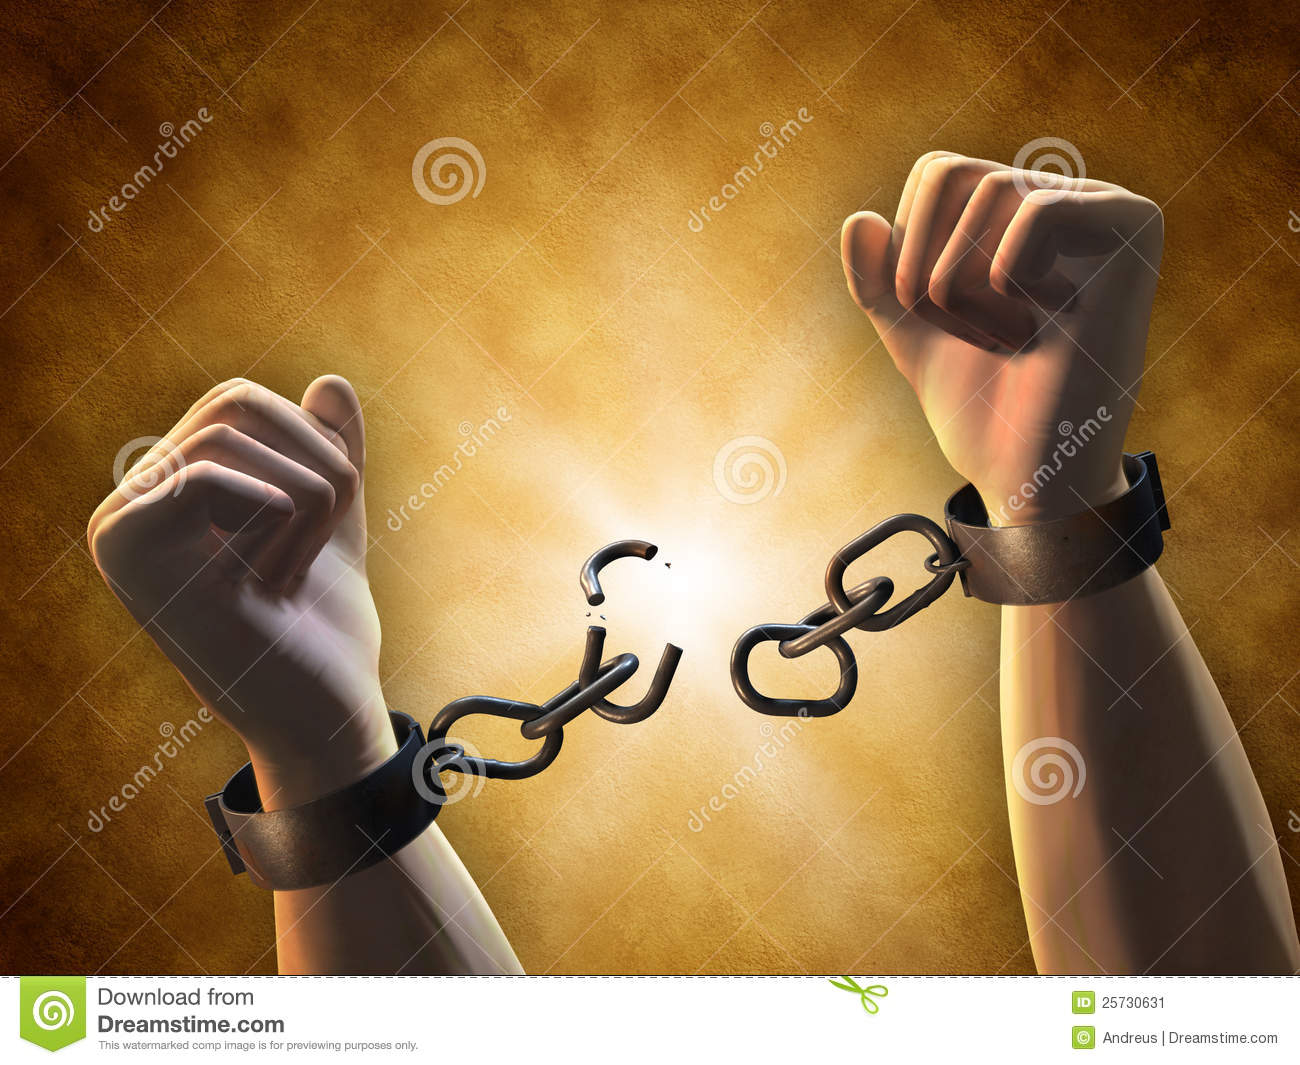 Breaking Chains Stock Image   Image  25730631